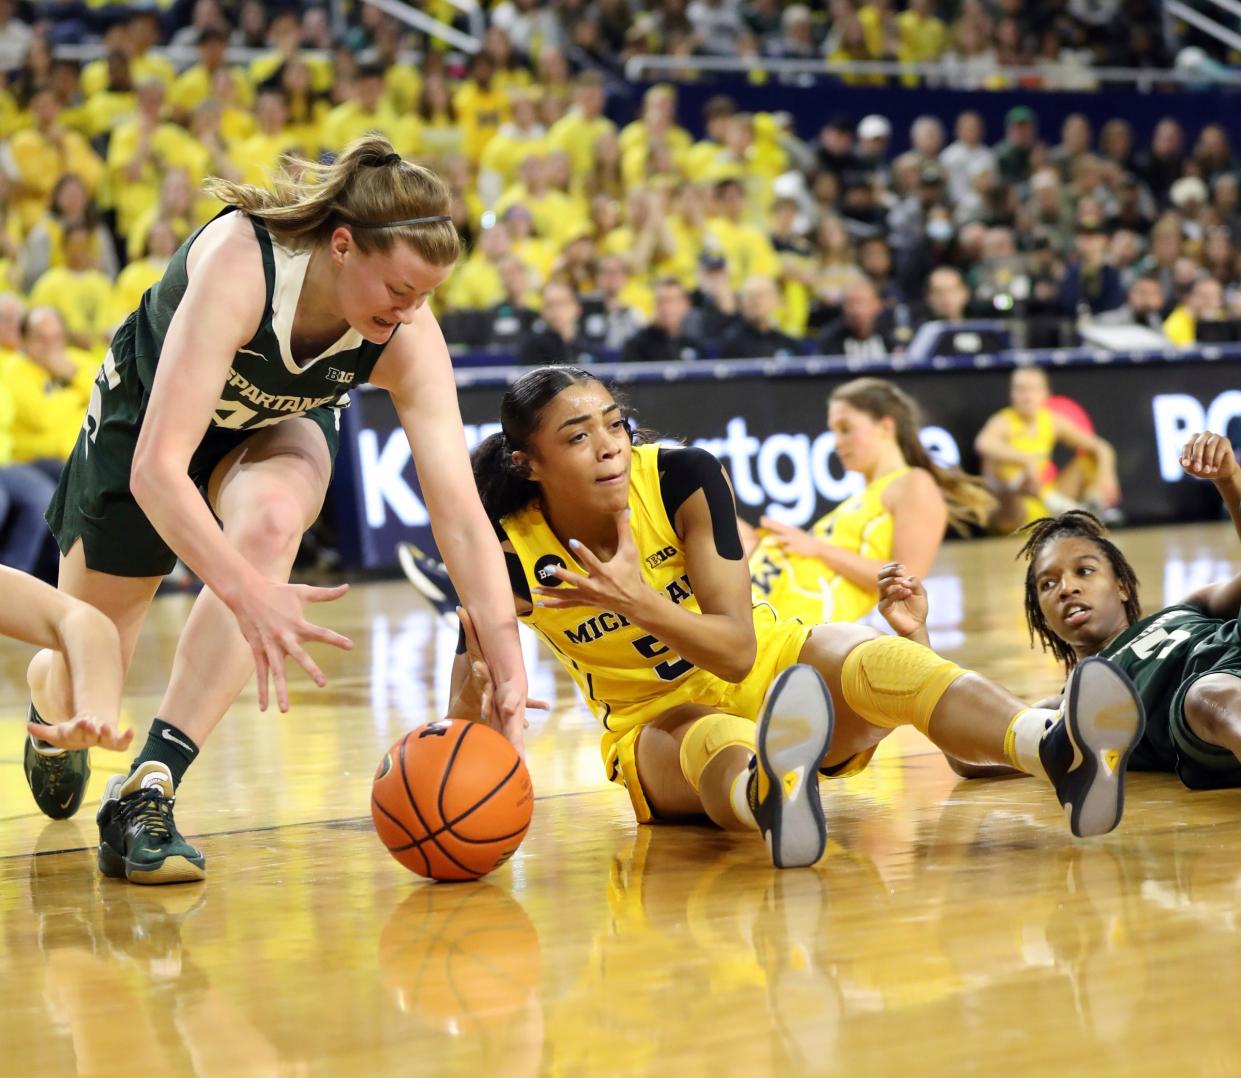 Michigan Wolverines guard Laila Phelia (5) goes for the ball against Michigan State Spartans guard Julia Ayrault (40) during second-quarter action at Crisler Center in Ann Arbor on Saturday, Jan. 14, 2023.